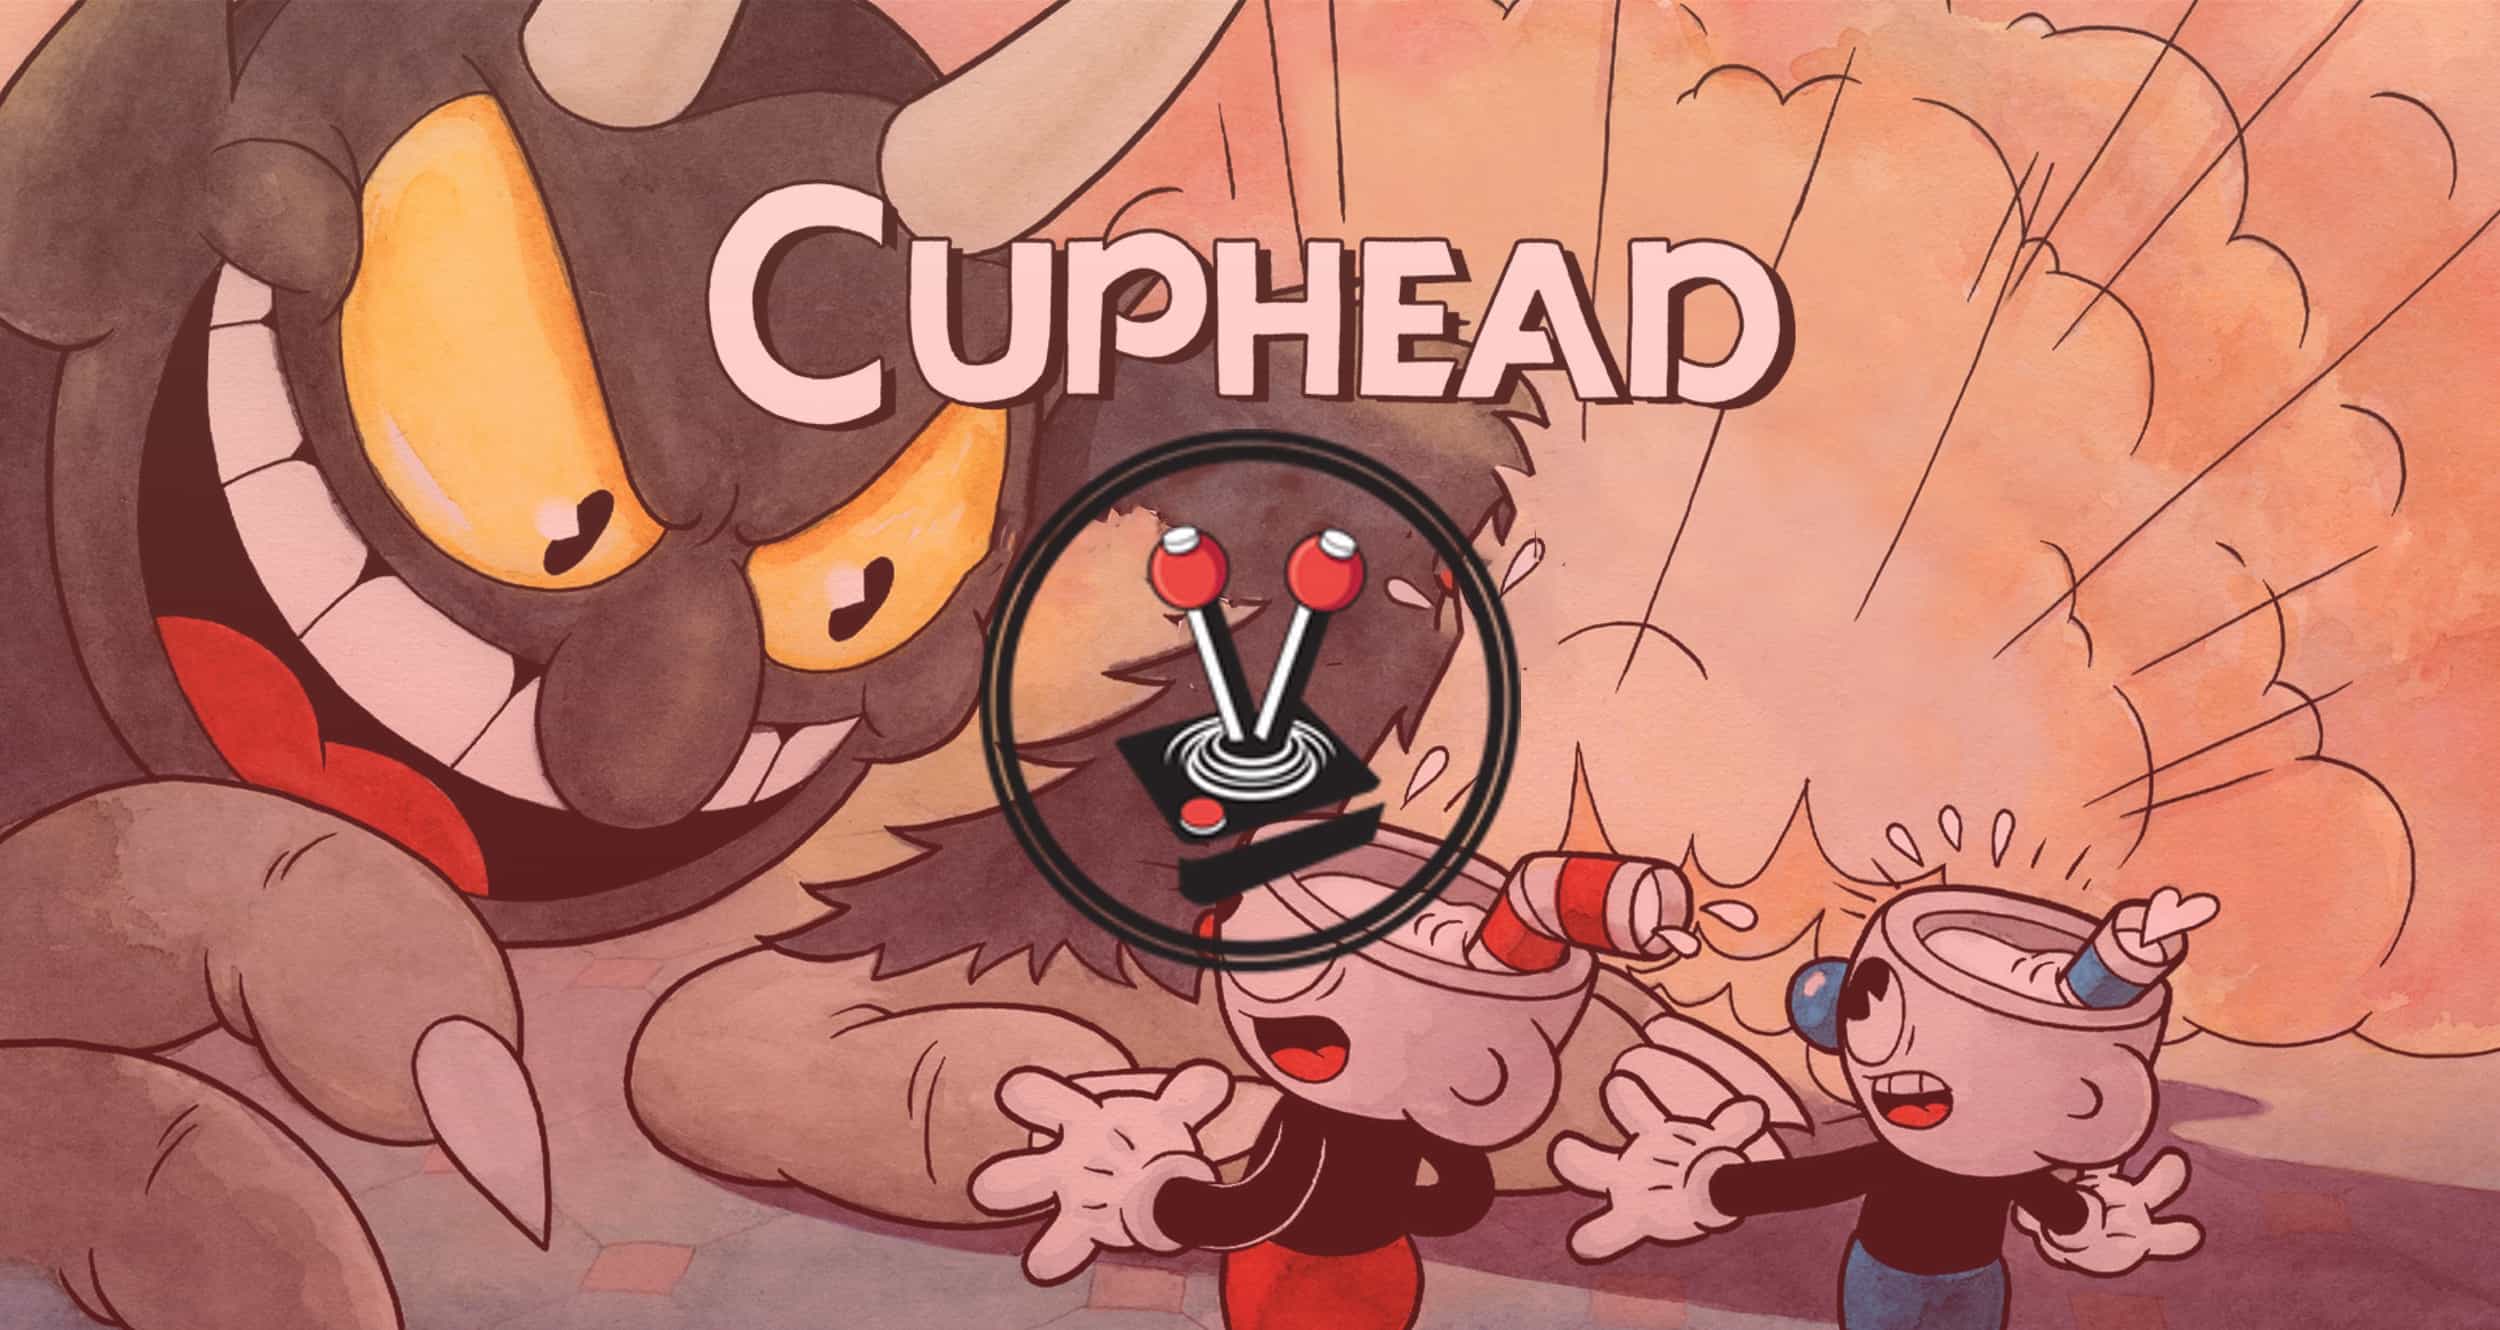 igg games cuphead free download